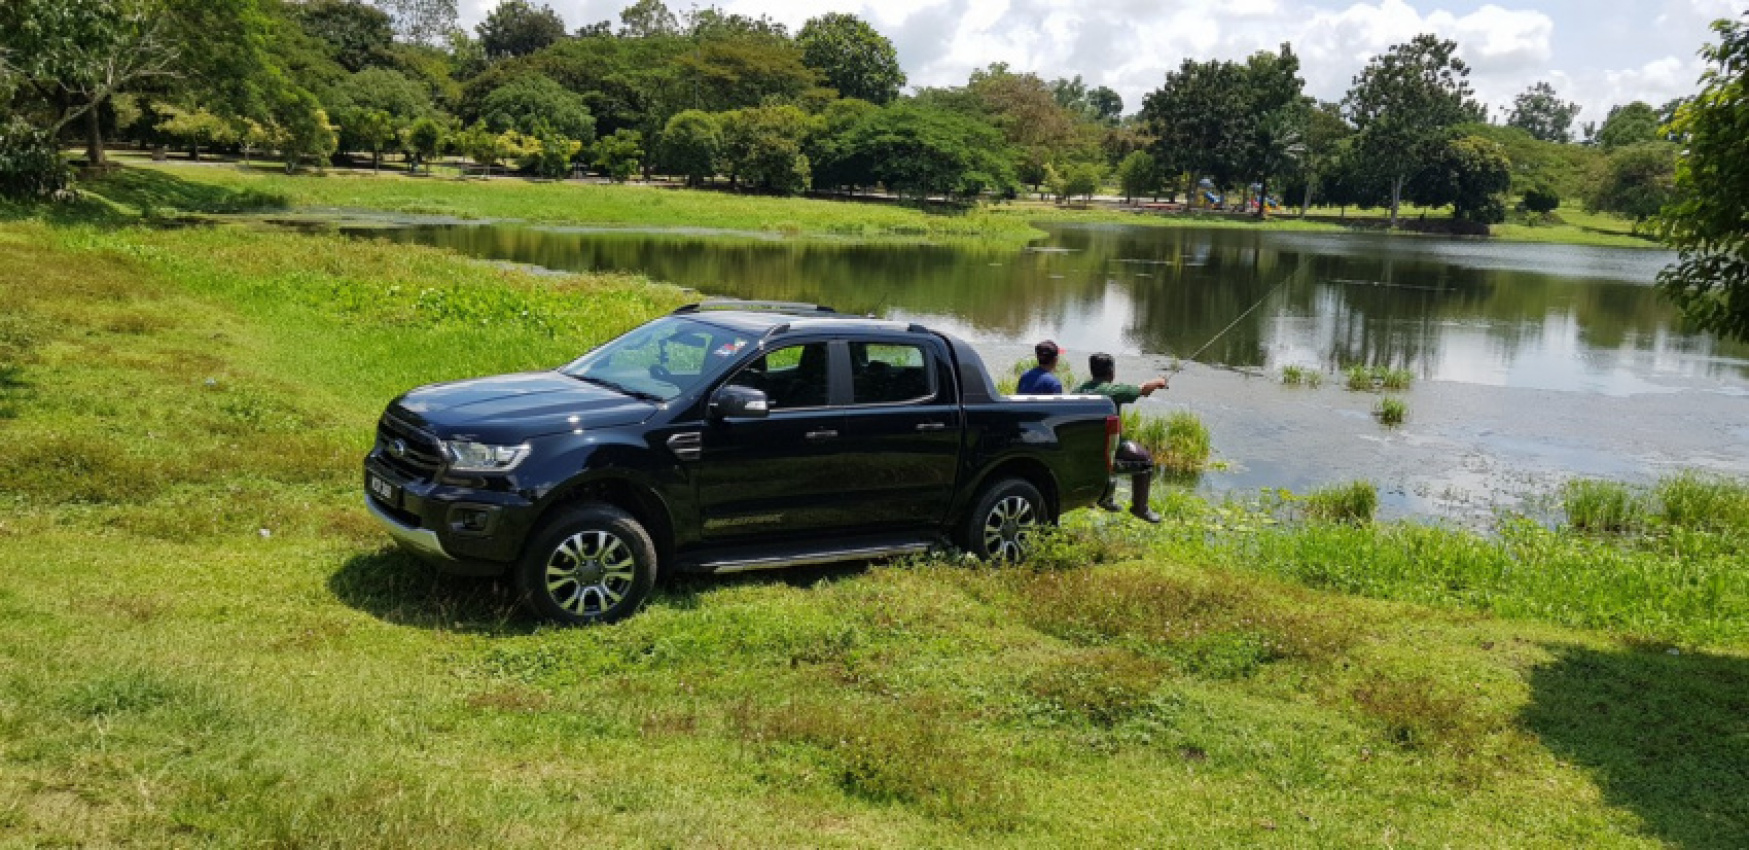 autos, car brands, cars, ford, automotive, ford ranger, malaysia, pick up truck, promotions, sime darby auto connexion, two years free maintenance for ford ranger wildtrak and raptor, among other goodies